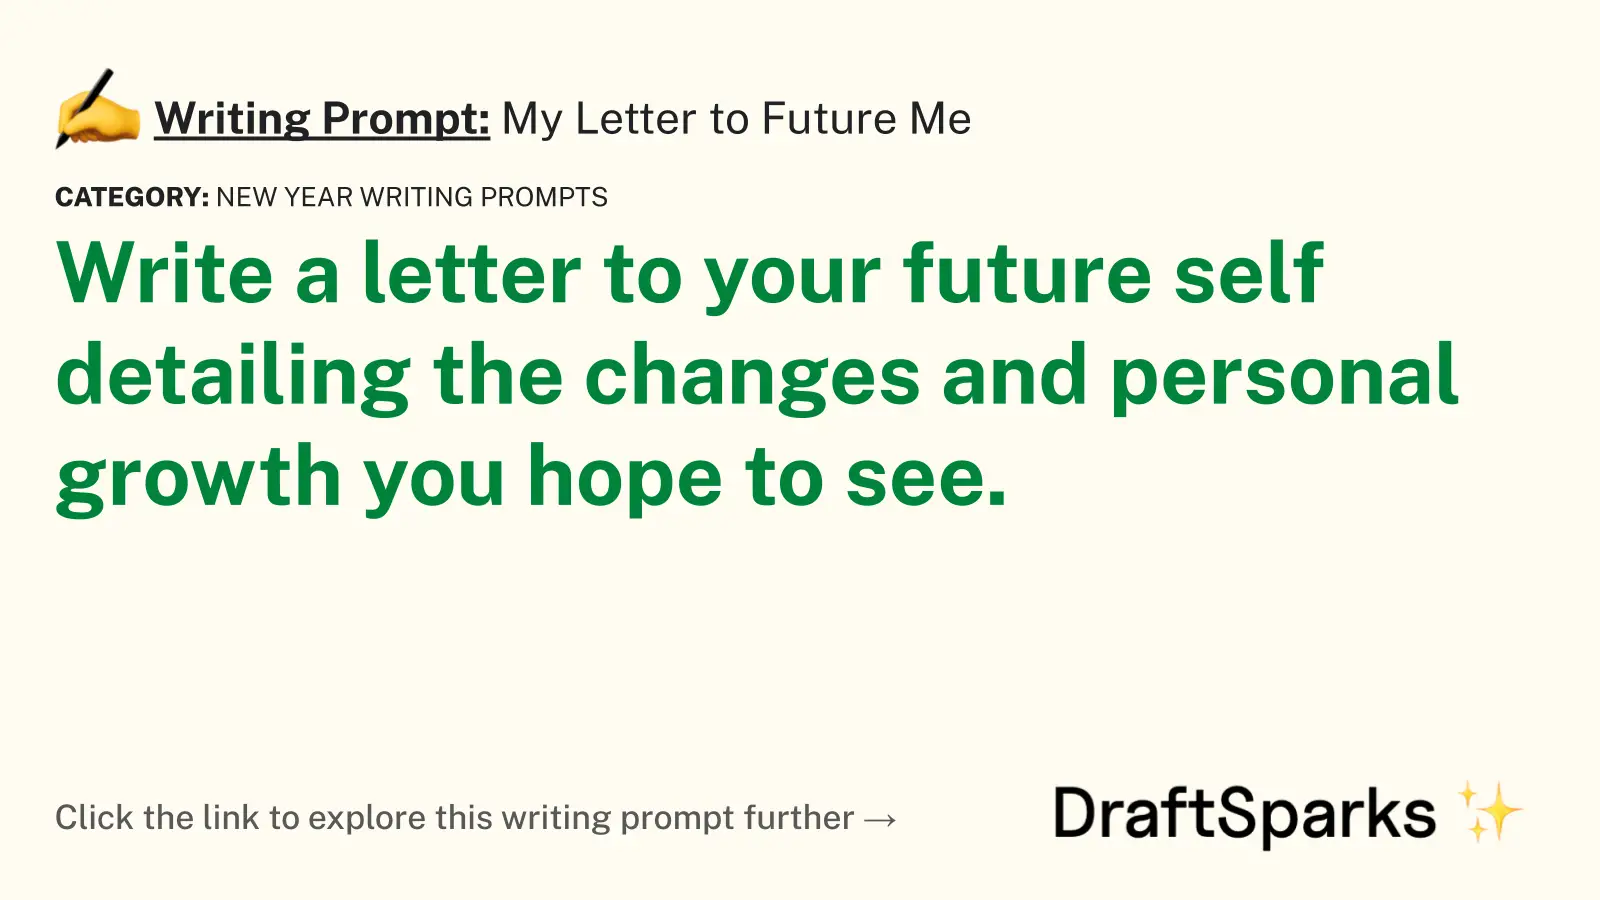 My Letter to Future Me